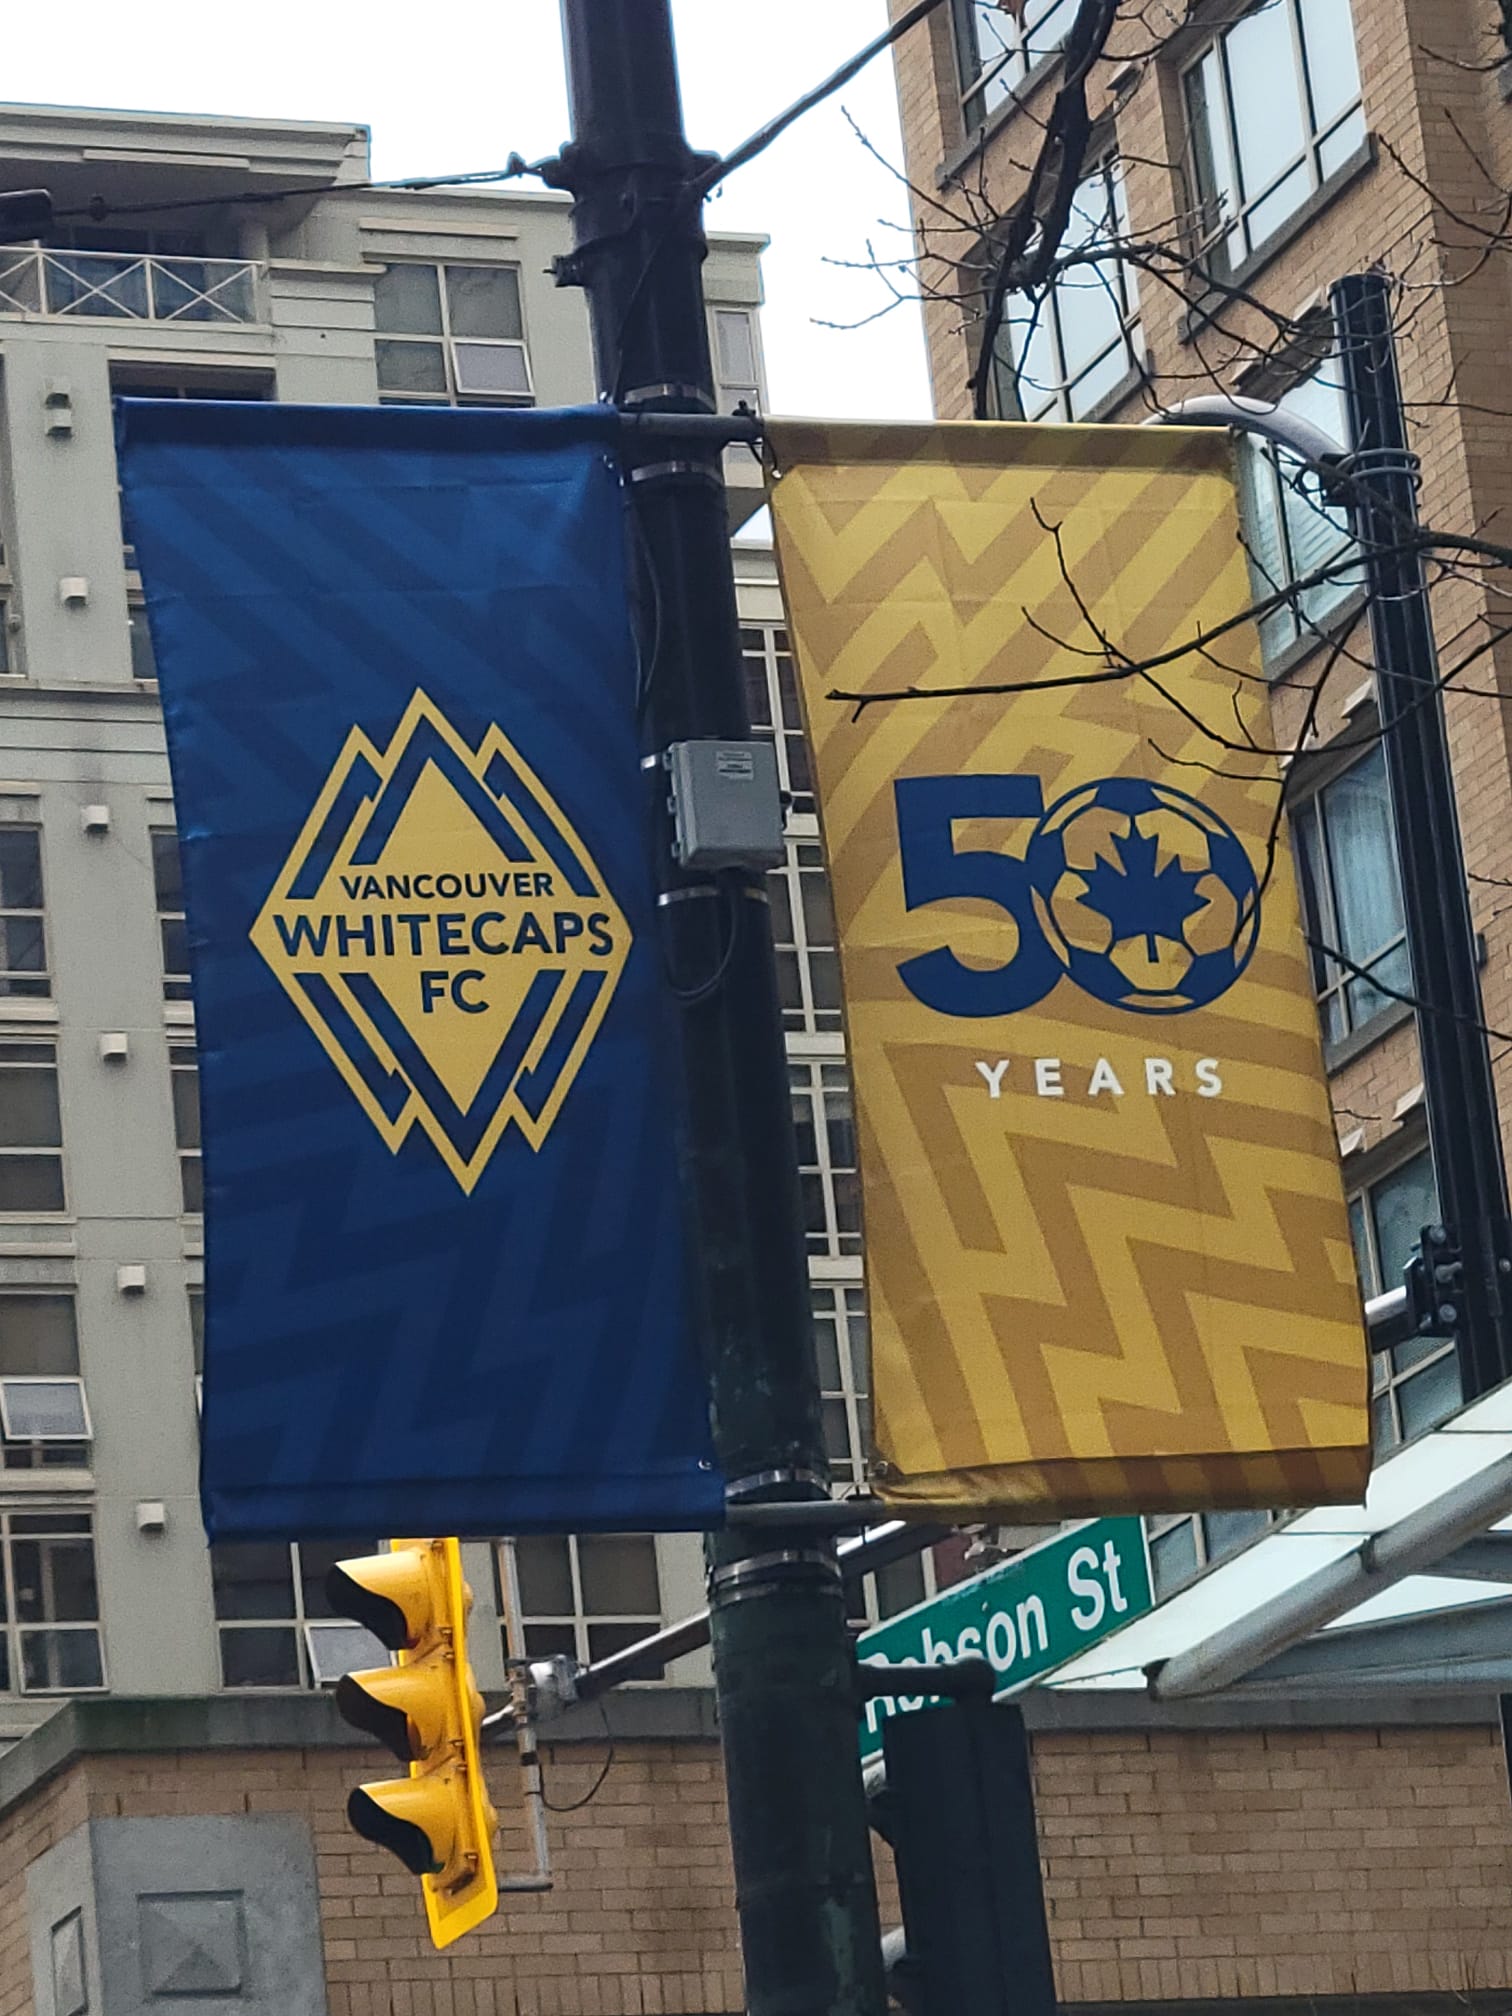 Whitecaps 50th Anniversery street pole banners close up